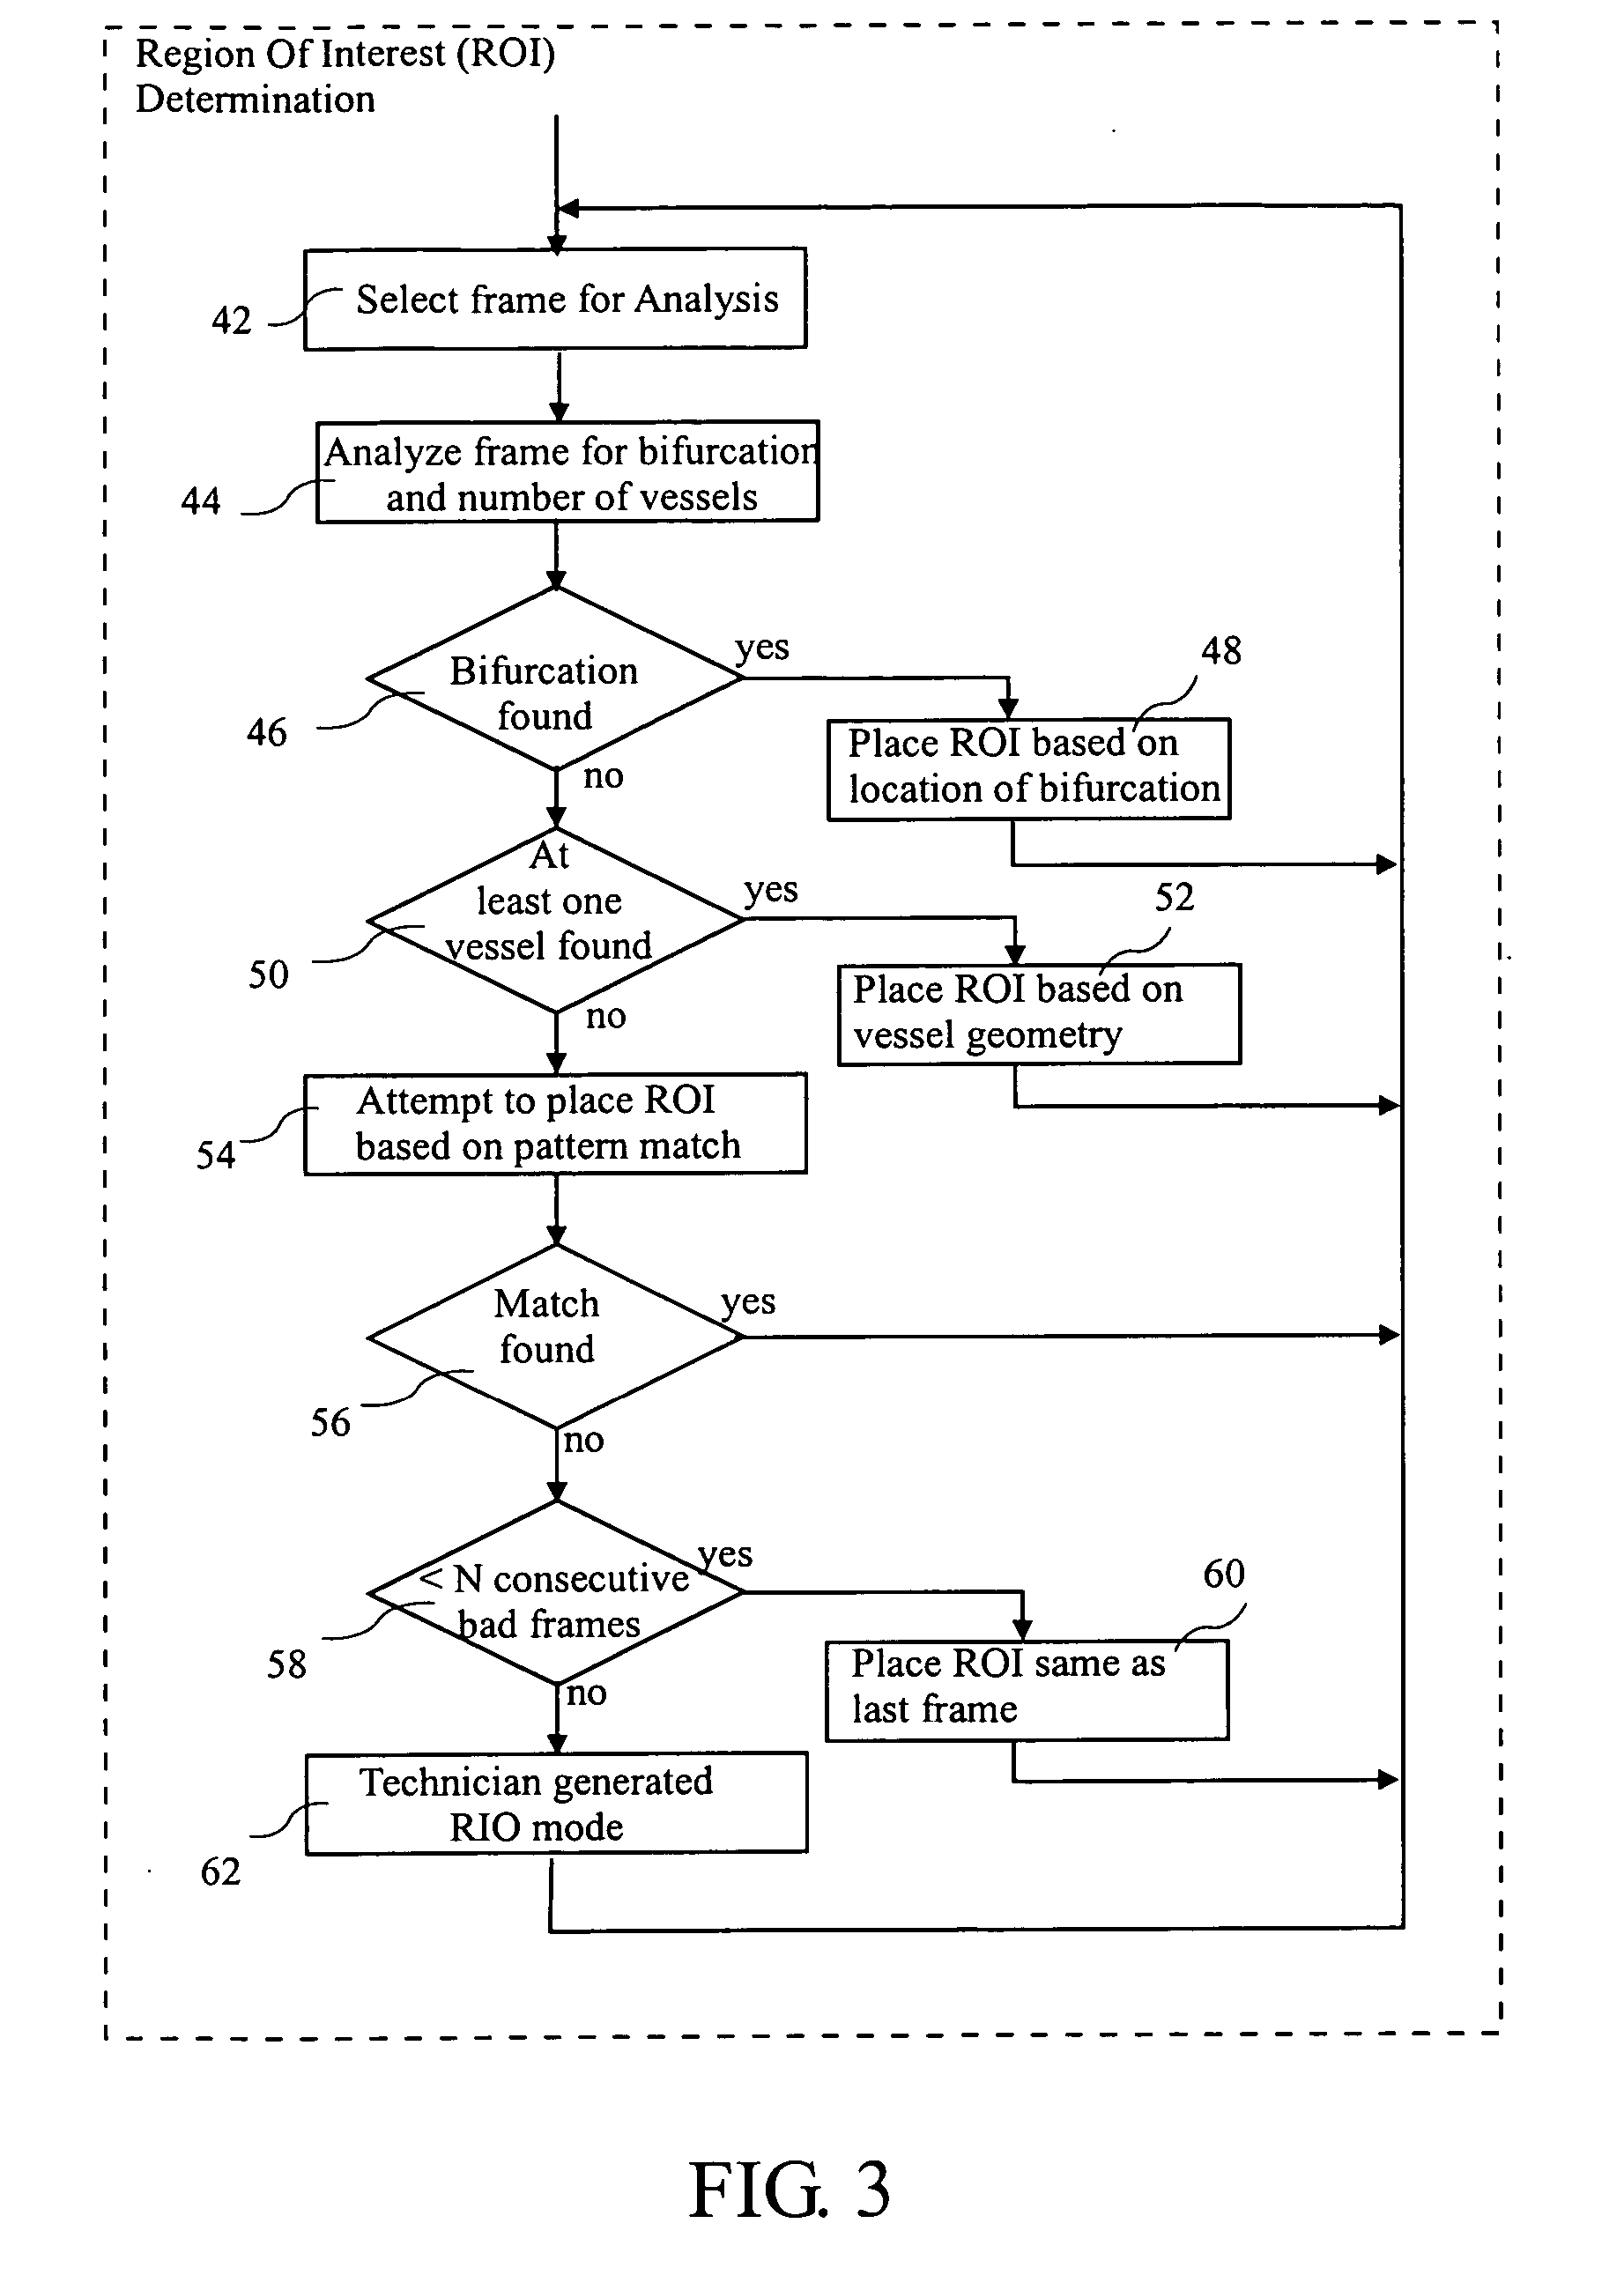 System and method for automatic determination of a Region Of Interest within an image